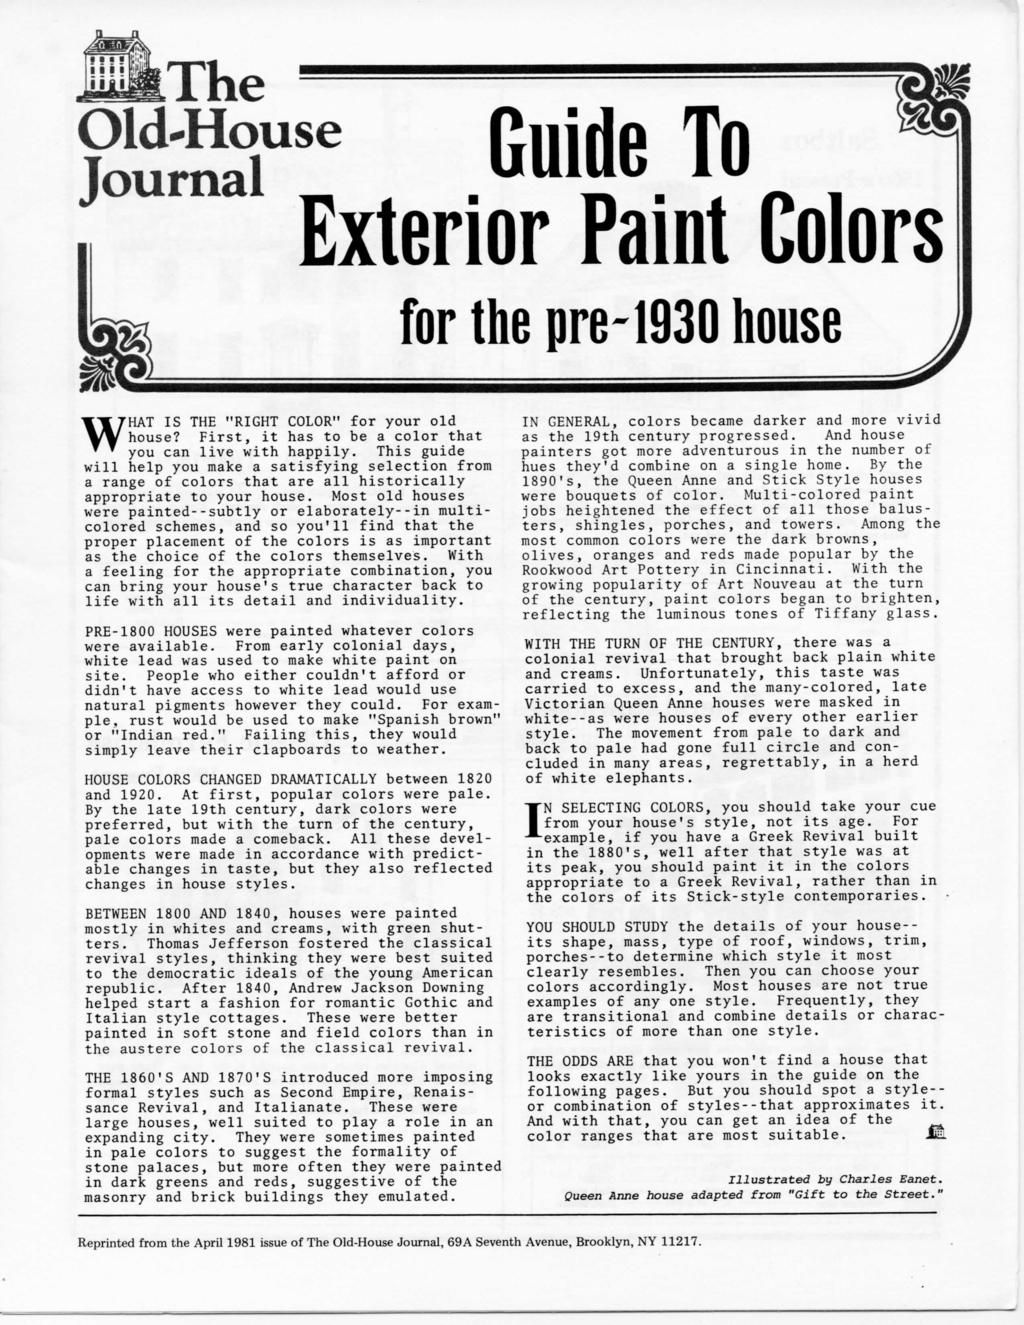 Guide To Exterior Paint Colors for the pre-1930 house Old-House Journal.. WHAT IS THE "RIGHT COLOR" for your old house? First, it has to be a color that you can live with happily.